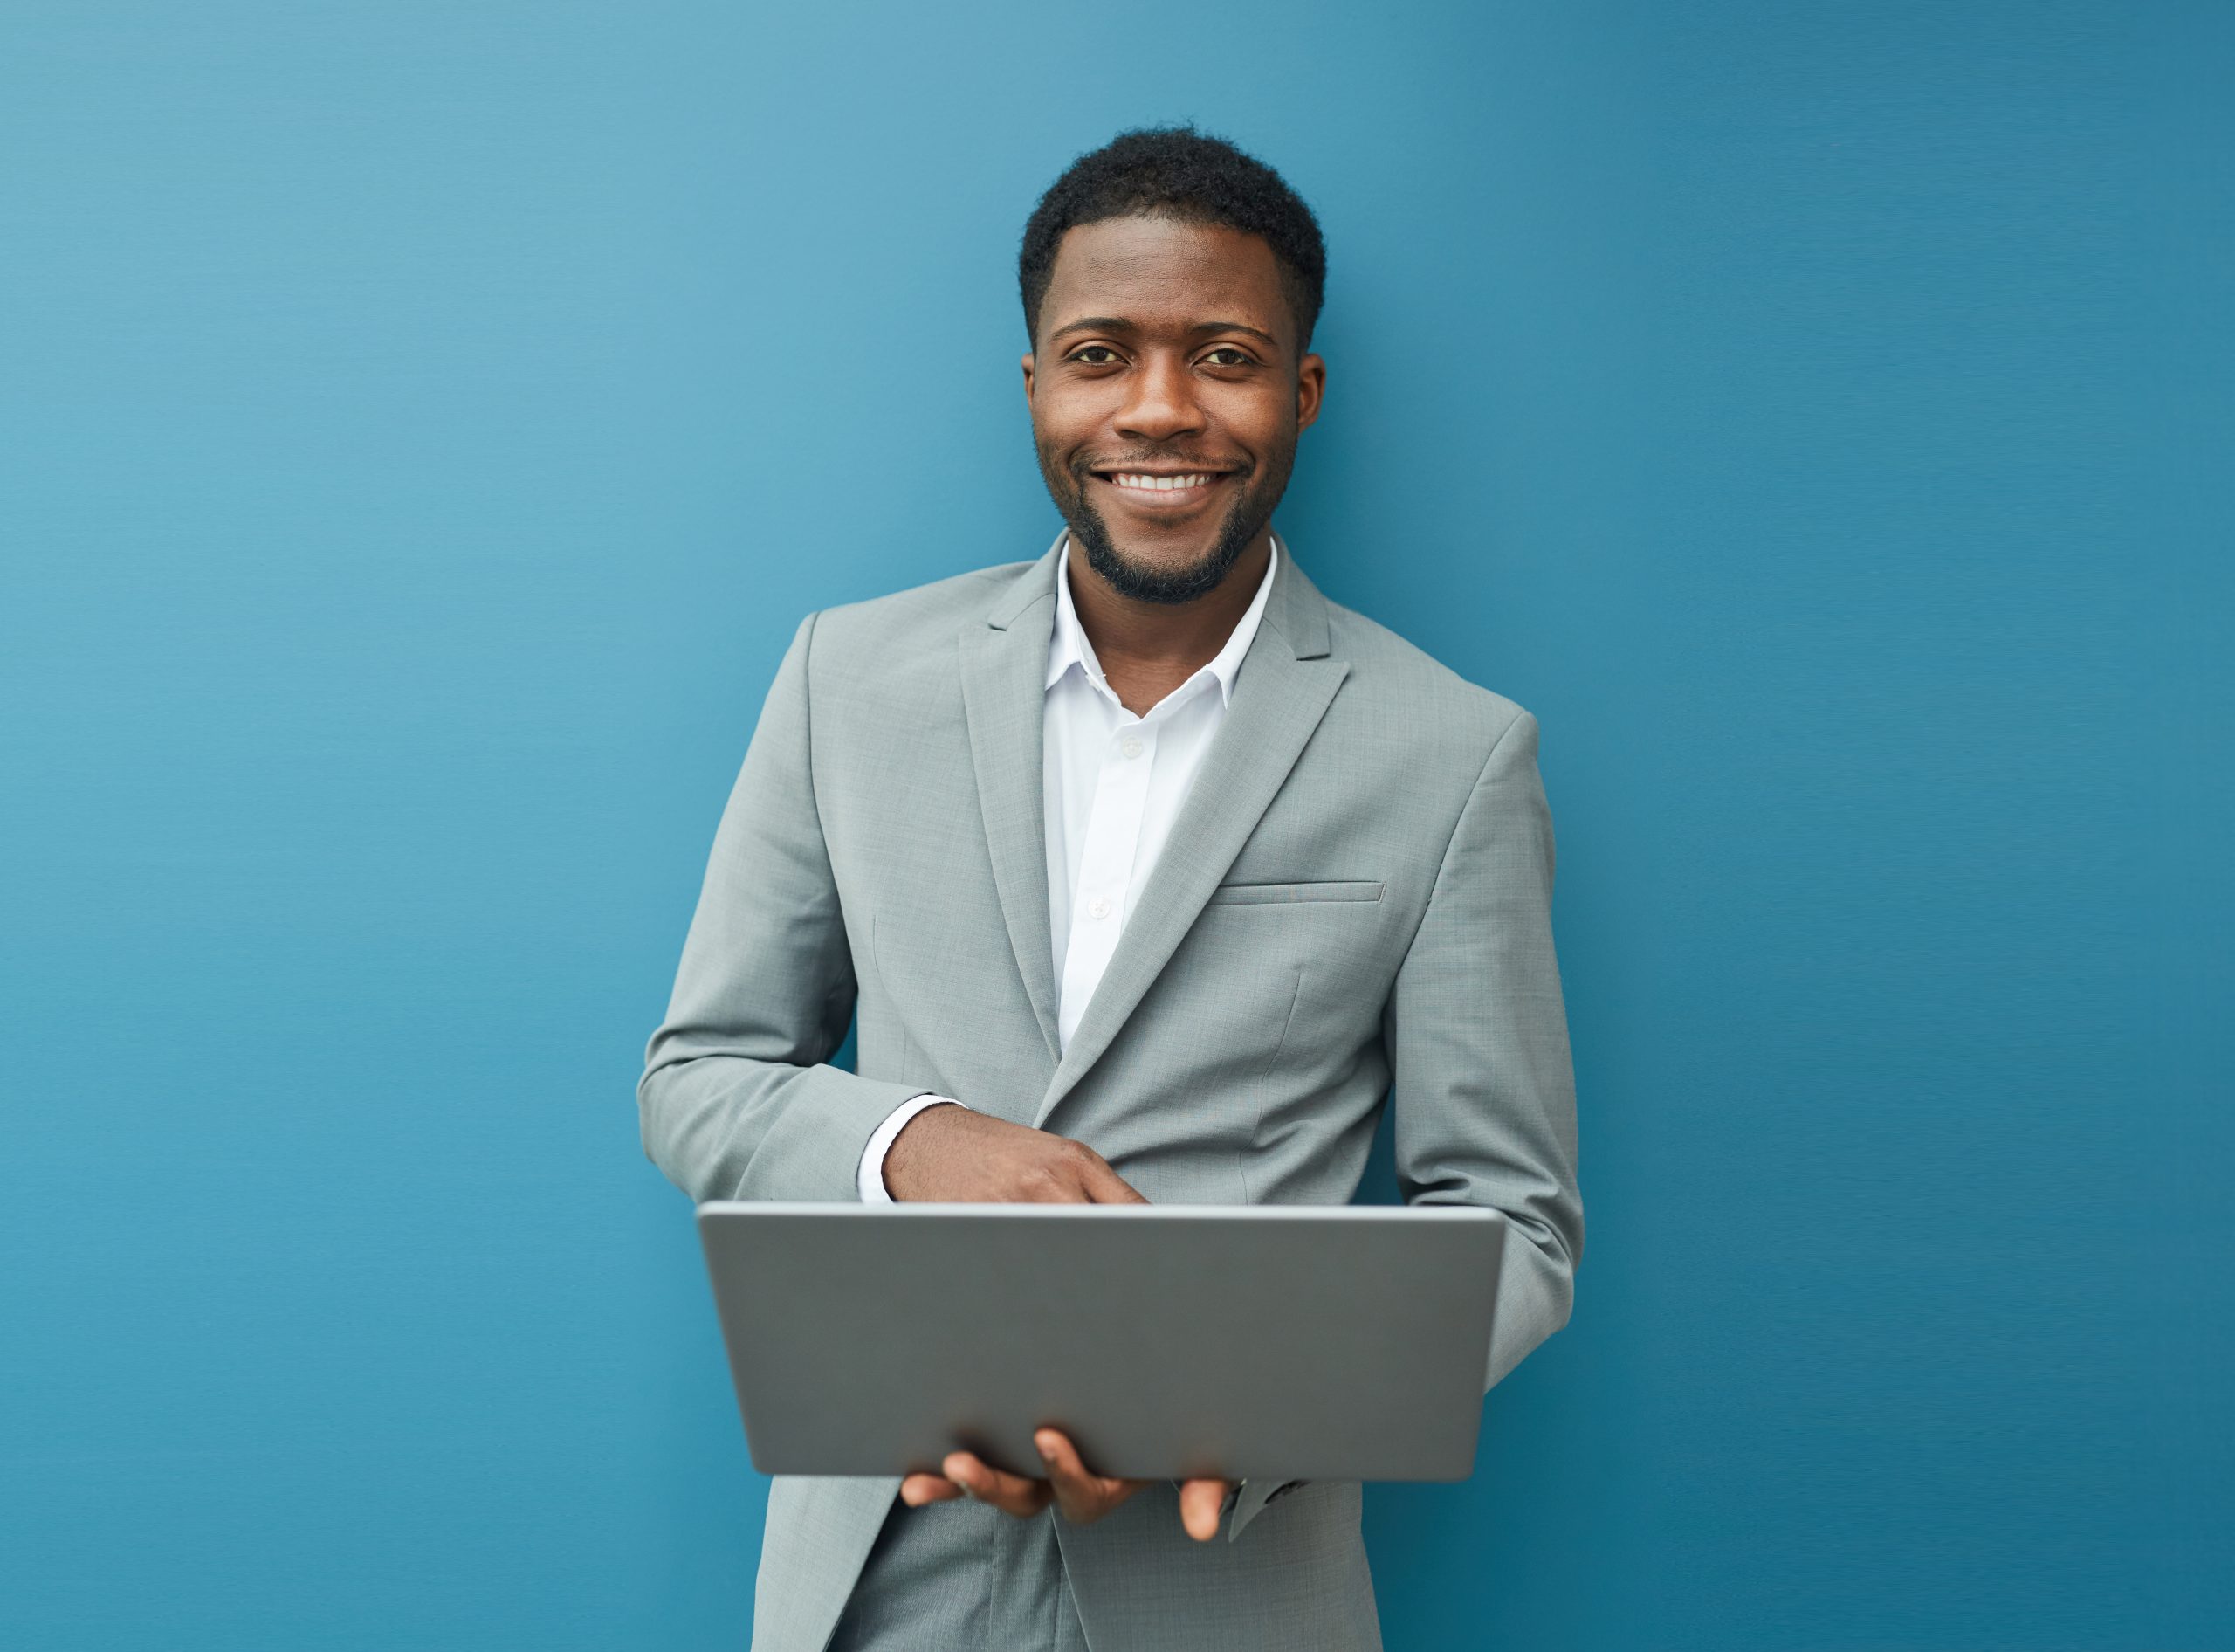 Portrait of smiling business man holding a laptop standing in front of a blue wall